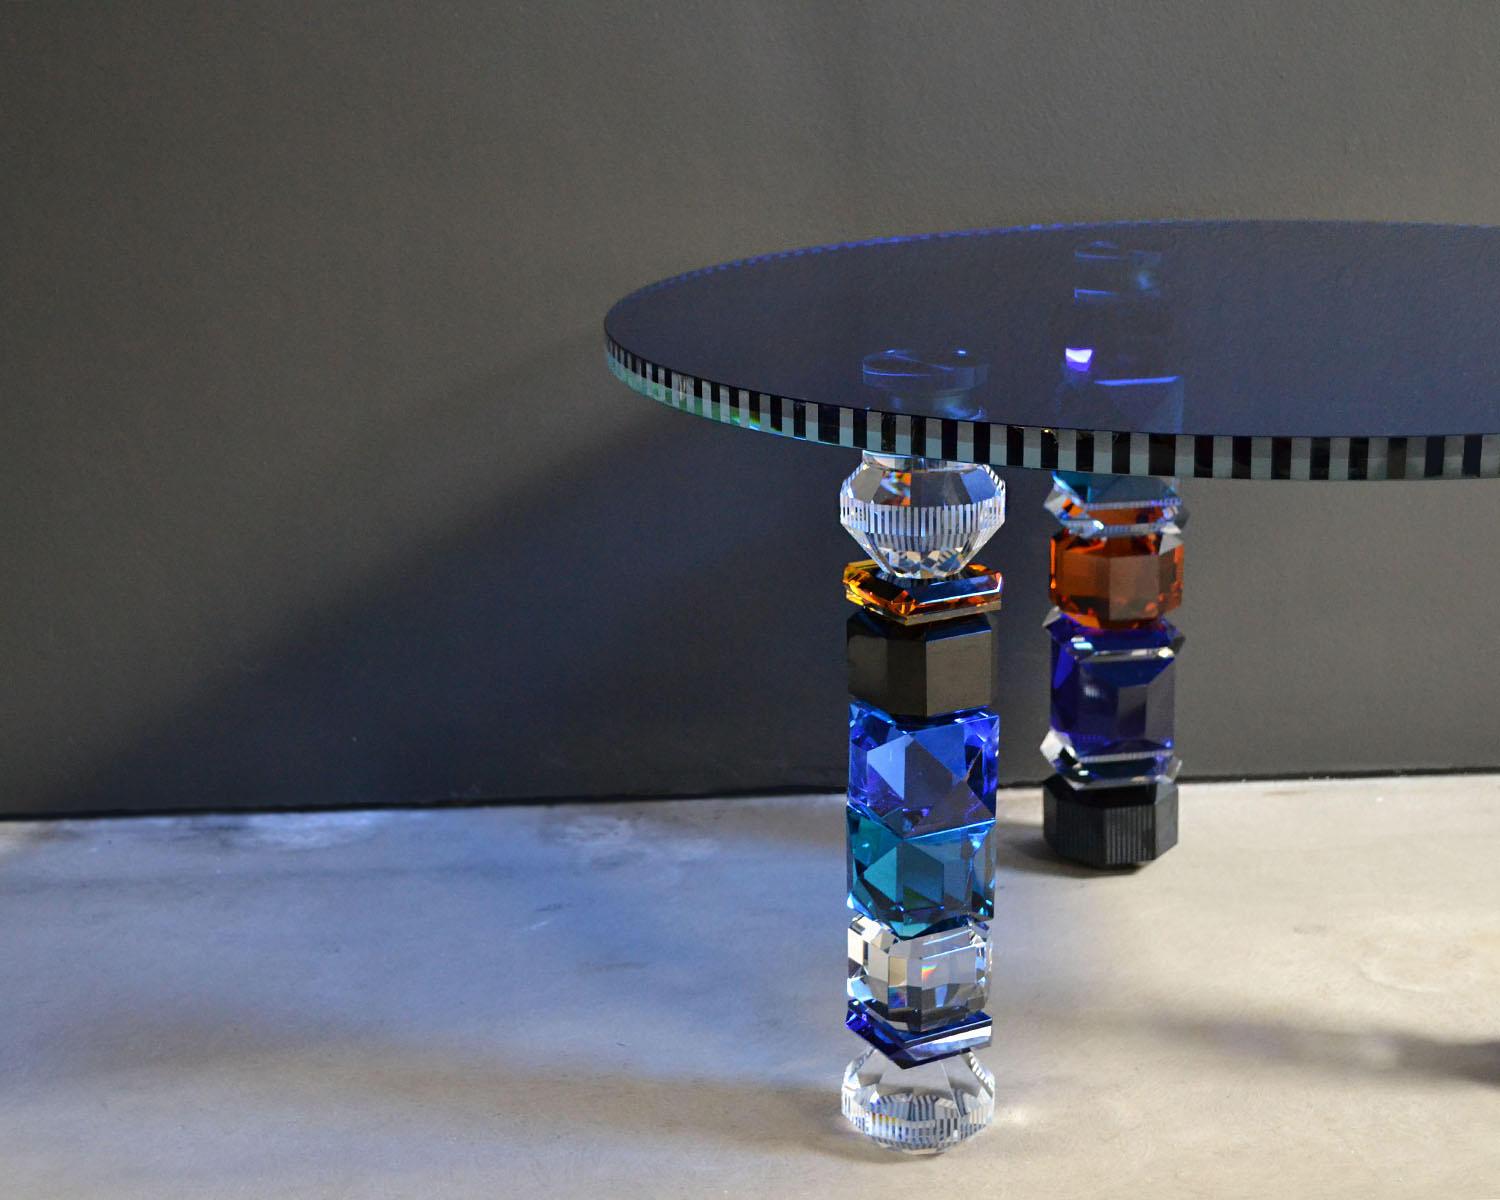 Hand-sculpted Setroit contemporary crystal table
Crystal table
Handcrafted decor made from crystal
Measures: W 75 x H 44 x D 75 cm
Hand-sculpted in crystal and glass

The handcrafted Detroit table is designed to be a sculptural furniture. Each